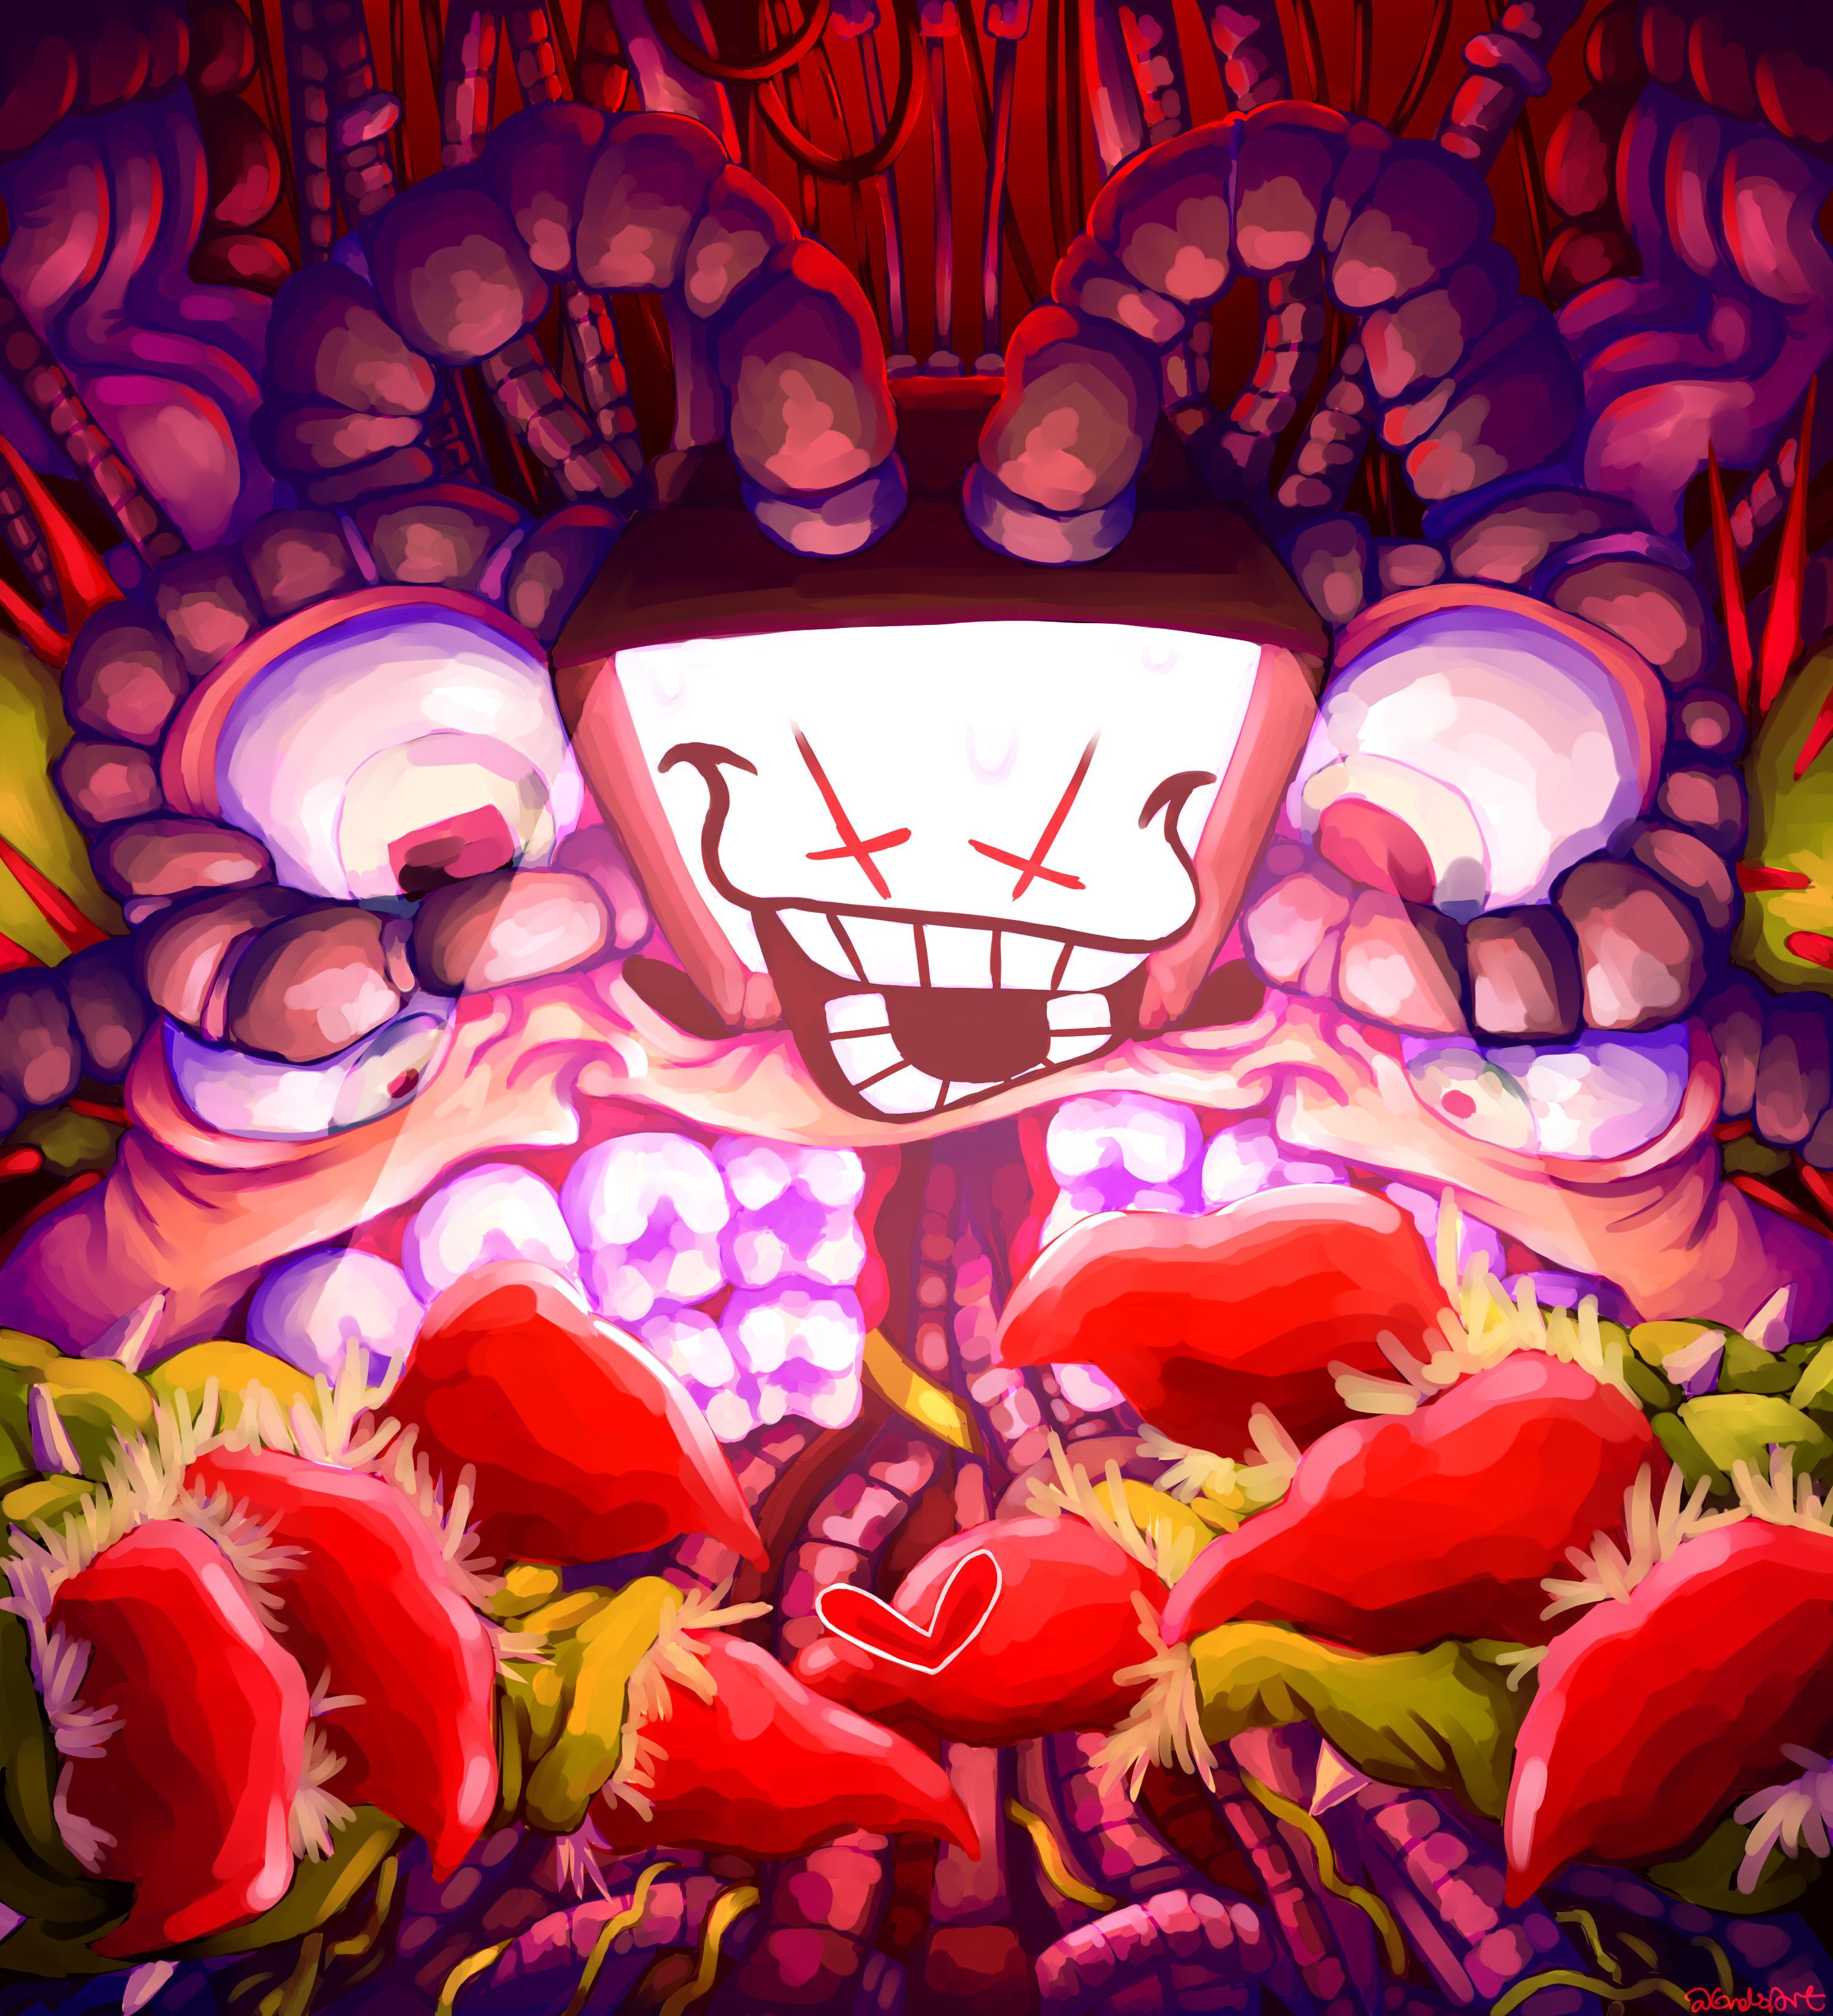 Omega flowey fanart(Second drawing ever and continued after my